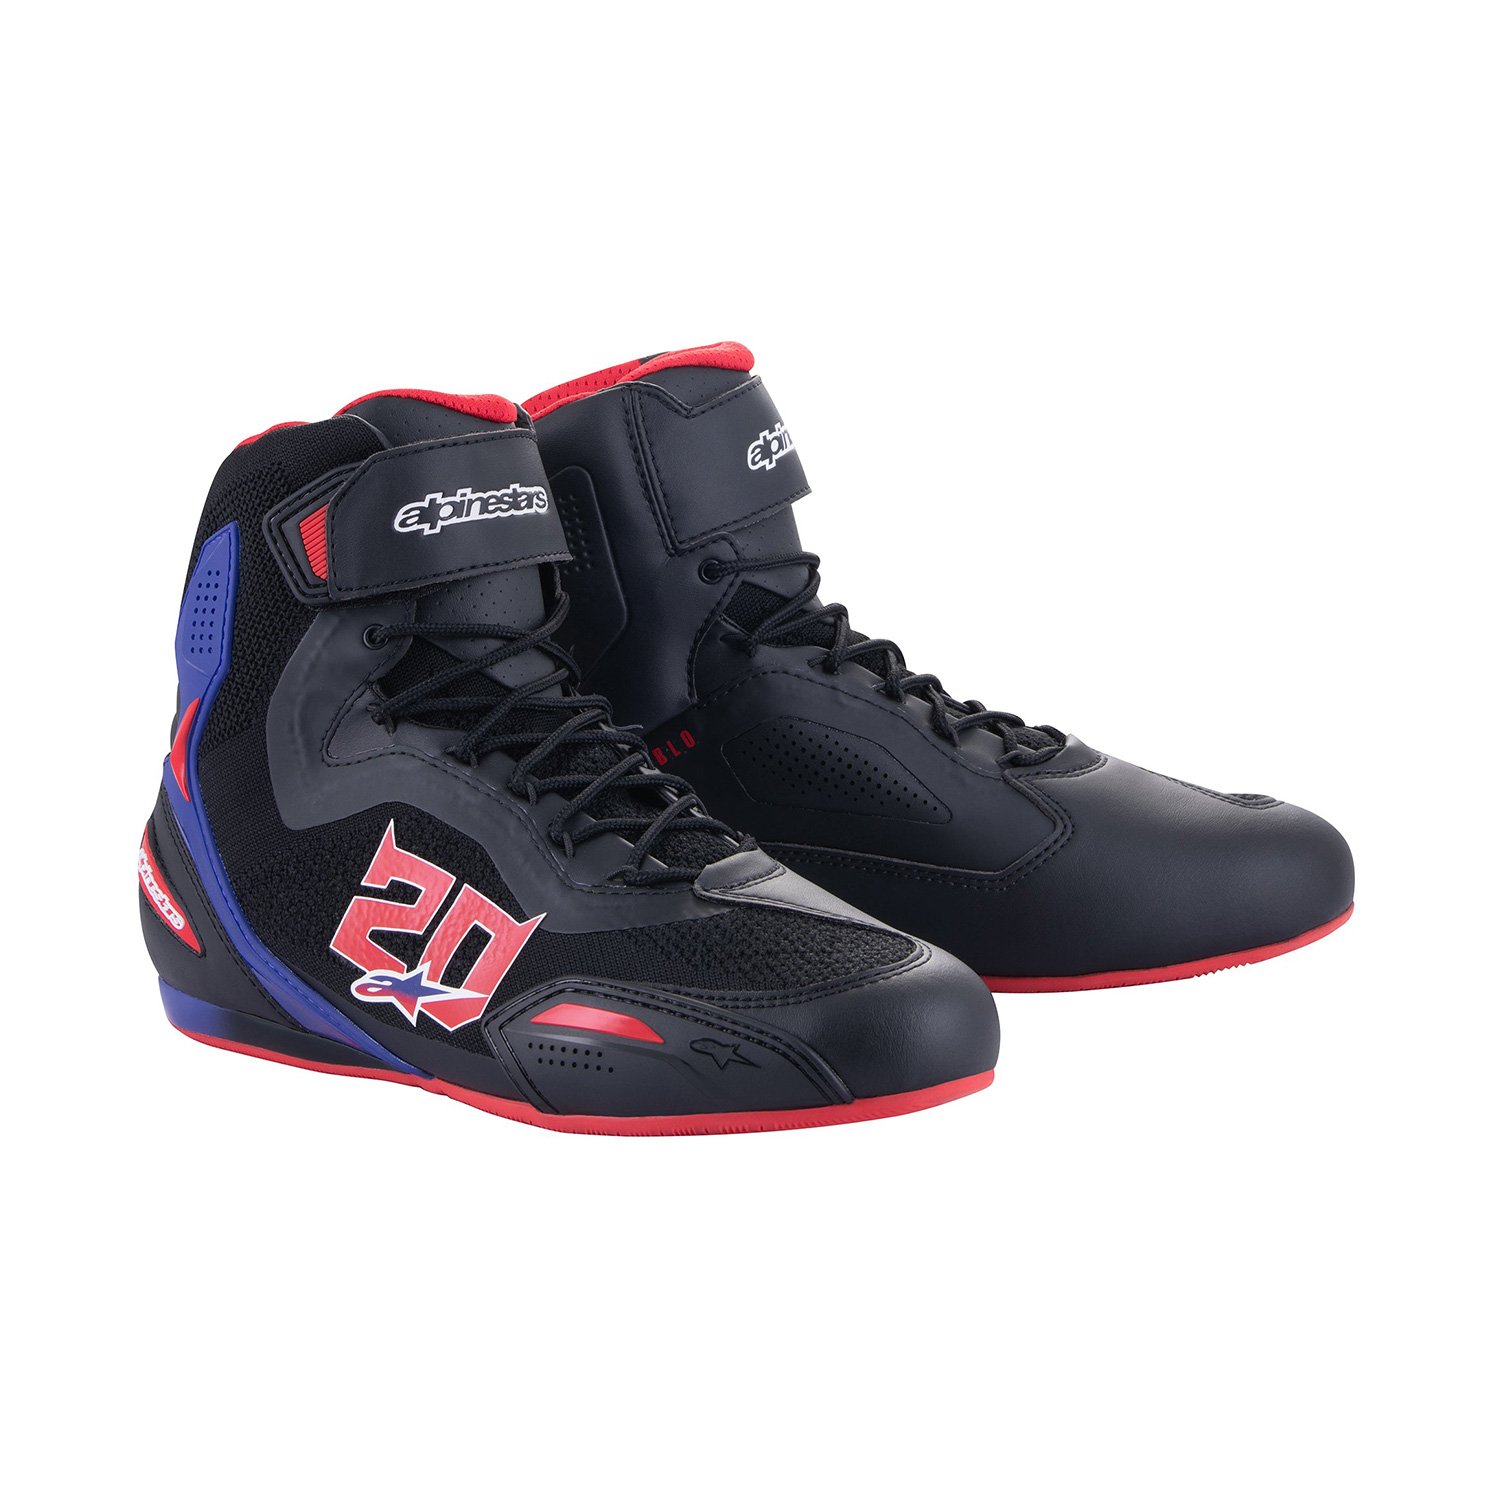 Image of EU Alpinestars FQ20 Faster-3 Rideknit Noir Bright Rouge Bleu Chaussures Taille US 14